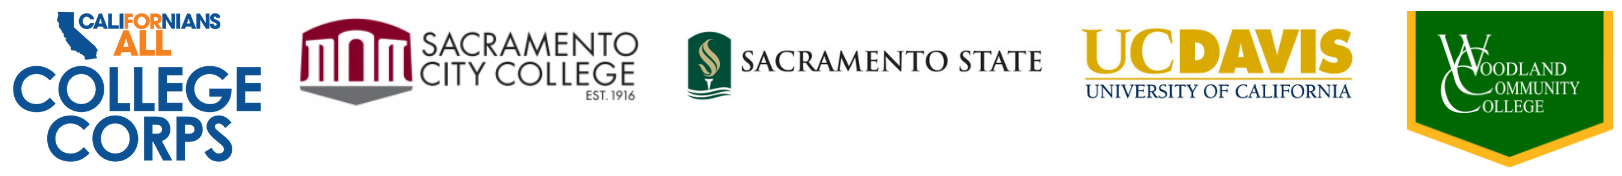 logos of Sacramento State University, Sacramento City College, UC Davis and Woodland Community College above the Californians for All College Corps Logo